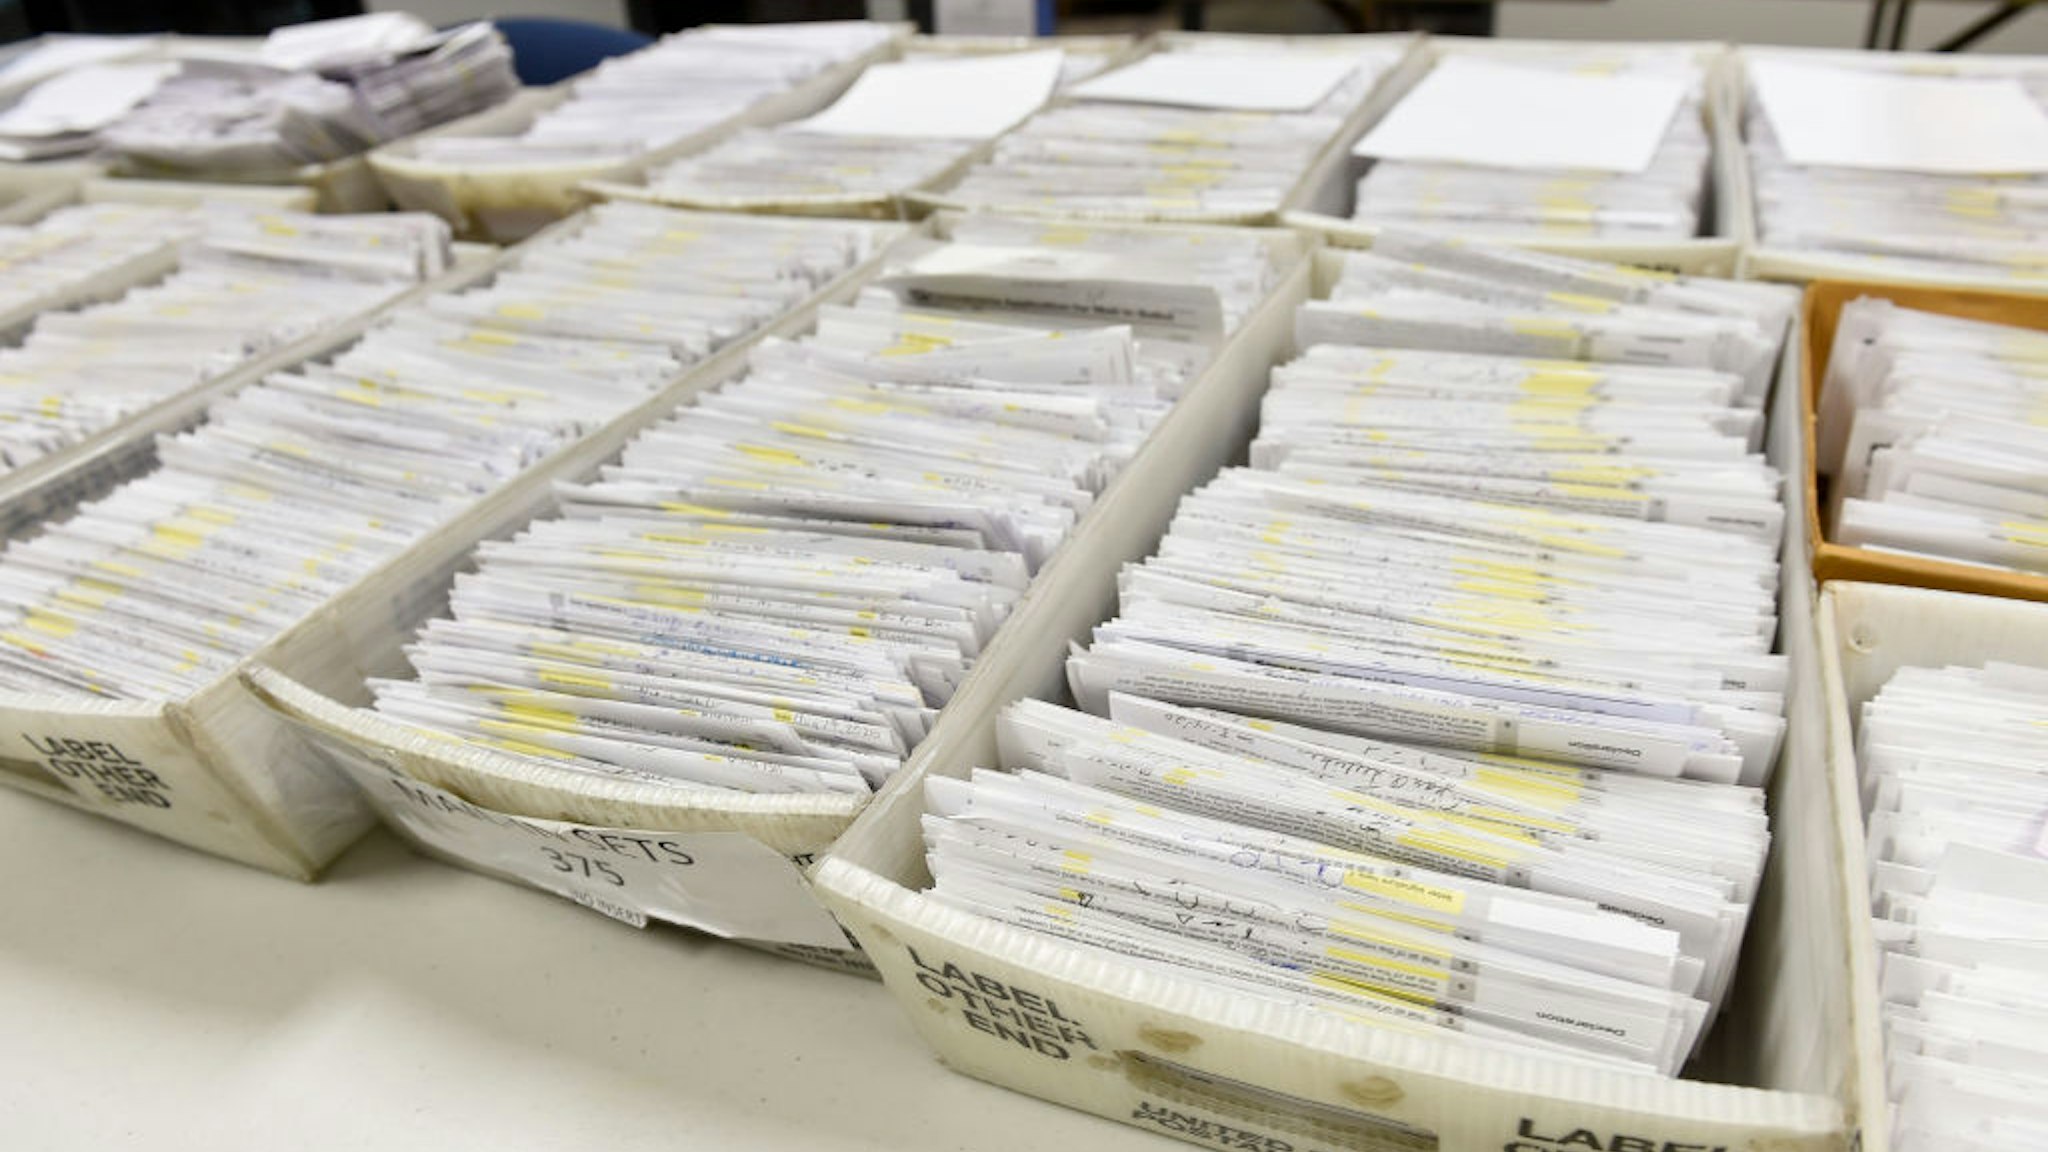 At the Berks County Office of Election Services in the Berks County Services Building in Reading, PA Thursday morning September 3, 2020 where they are processing applications for mail-in ballots. (Photo by Ben Hasty/MediaNews Group/Reading Eagle via Getty Images)